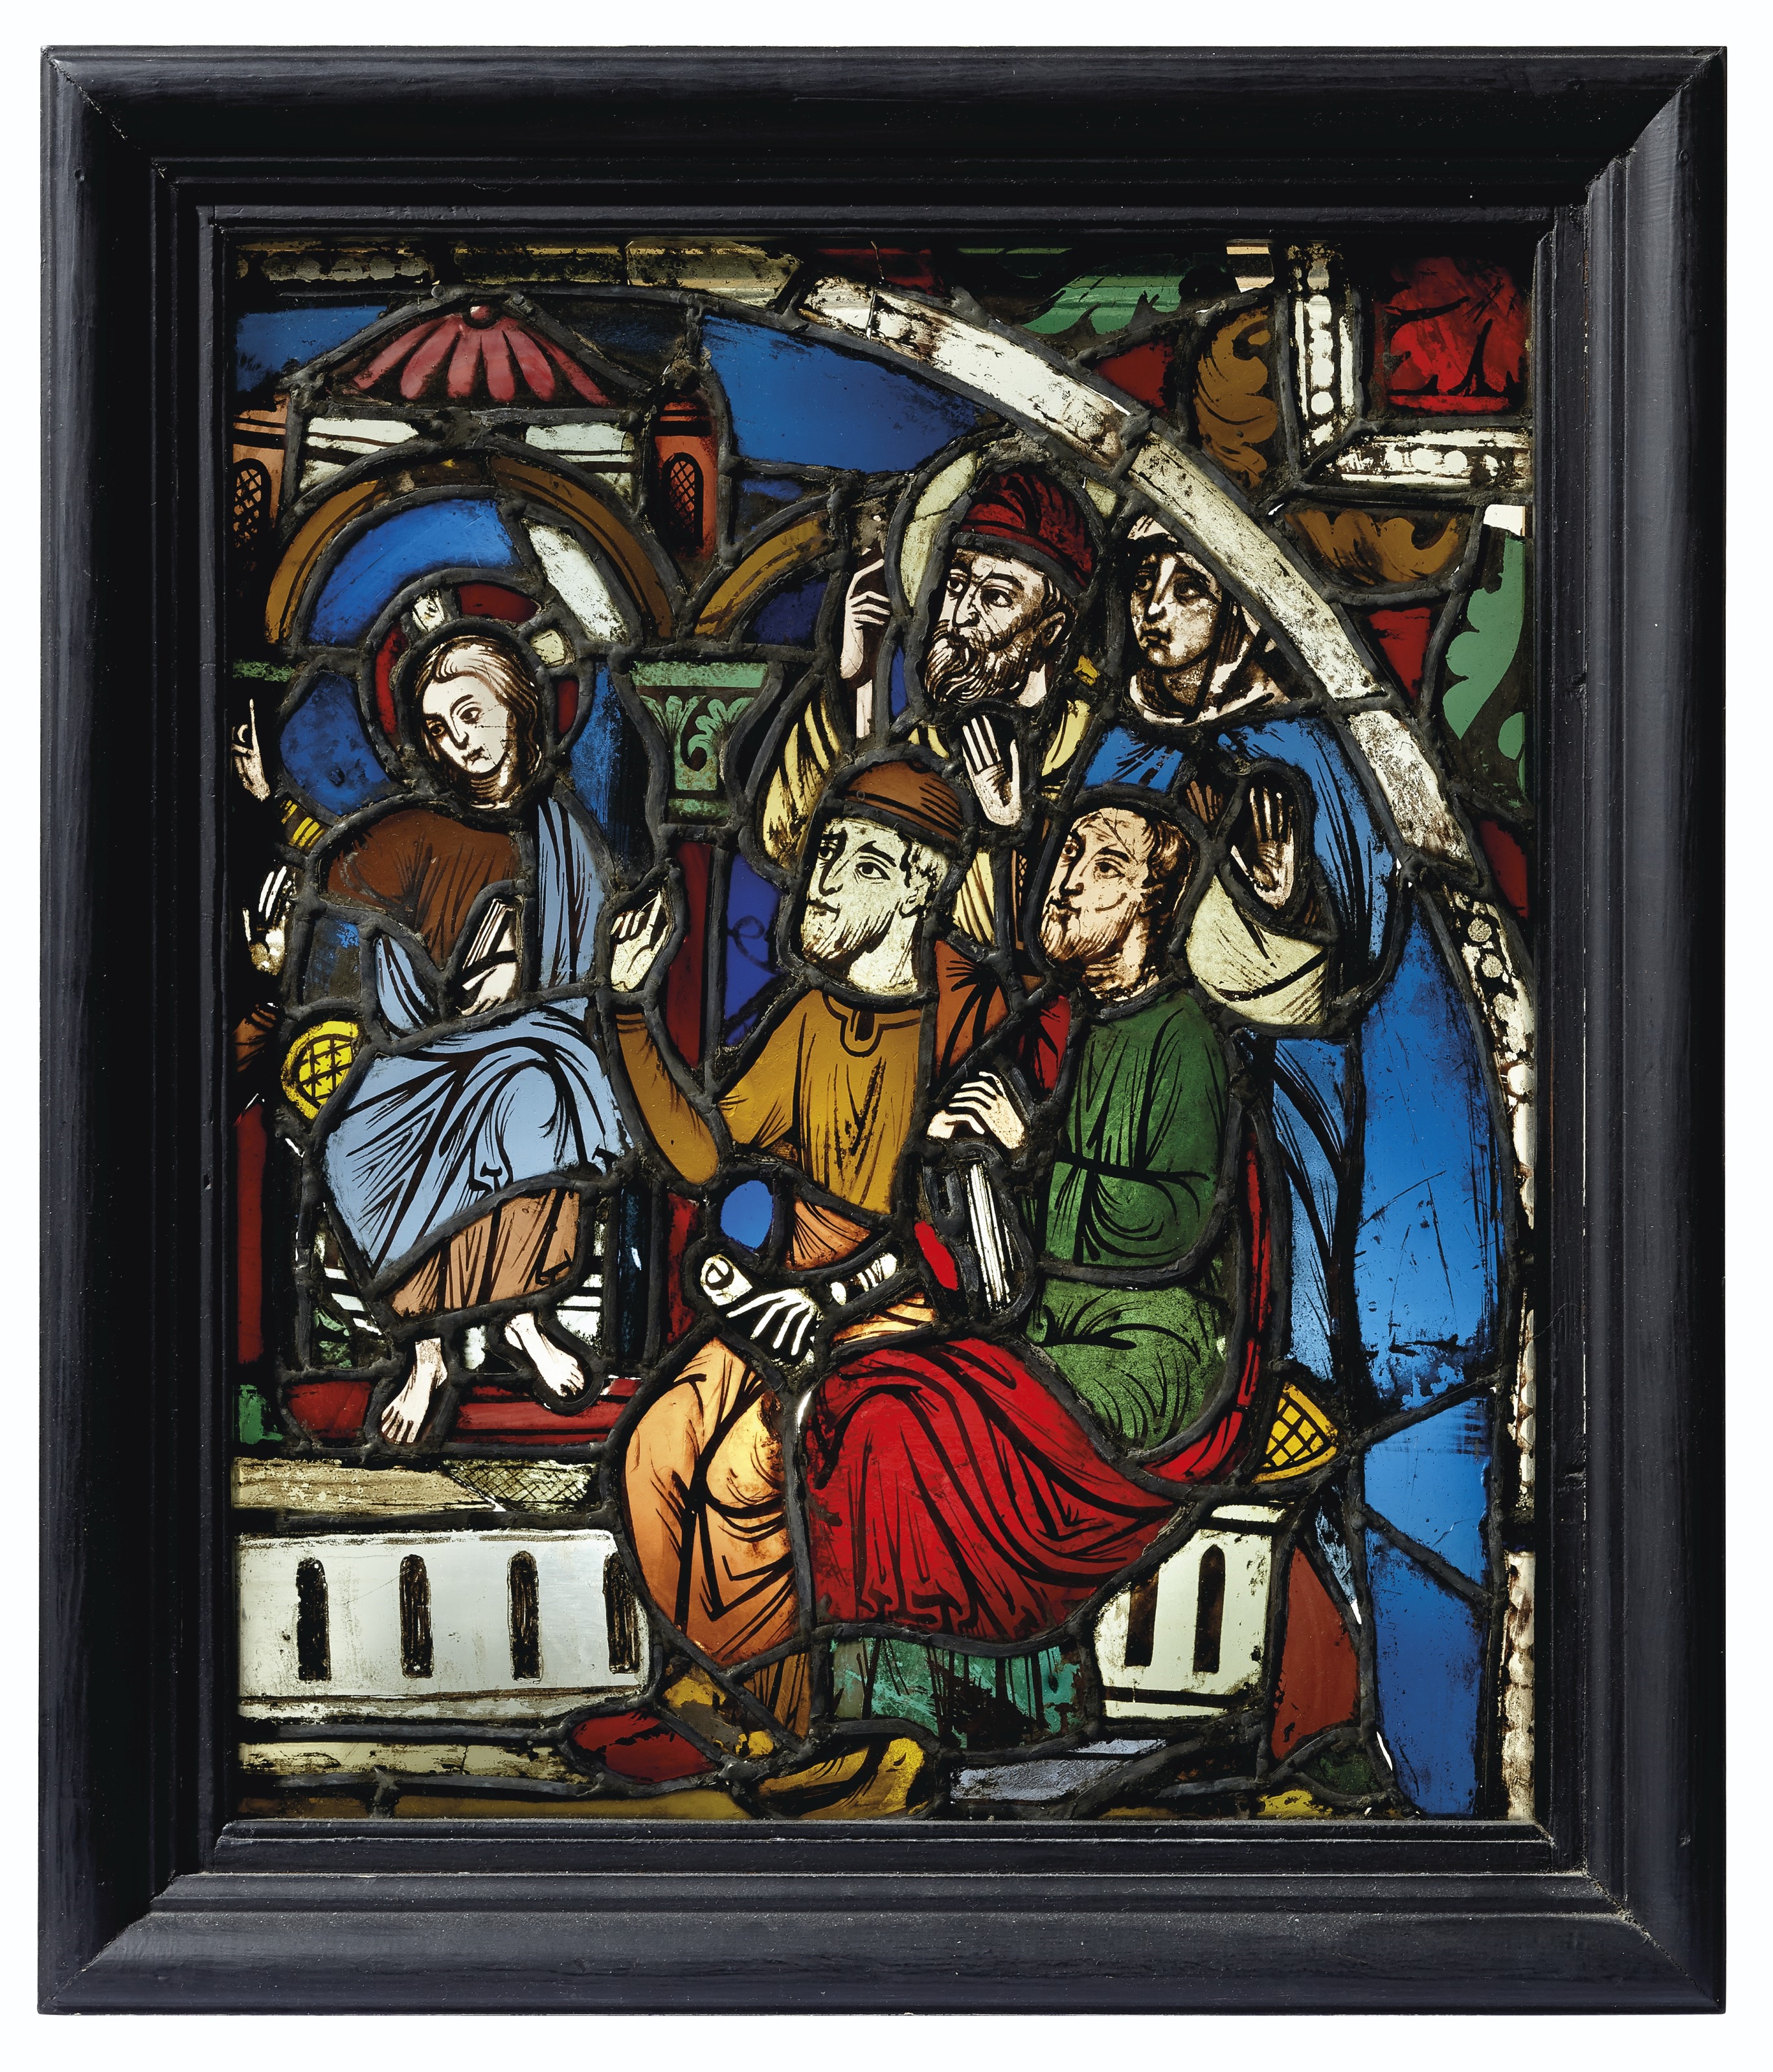 Artwork by French School, 13th Century, A STAINED GLASS WINDOW FRAGMENT DEPICTING CHRIST IN THE TEMPLE(?) IN A LATER BLACK FRAME